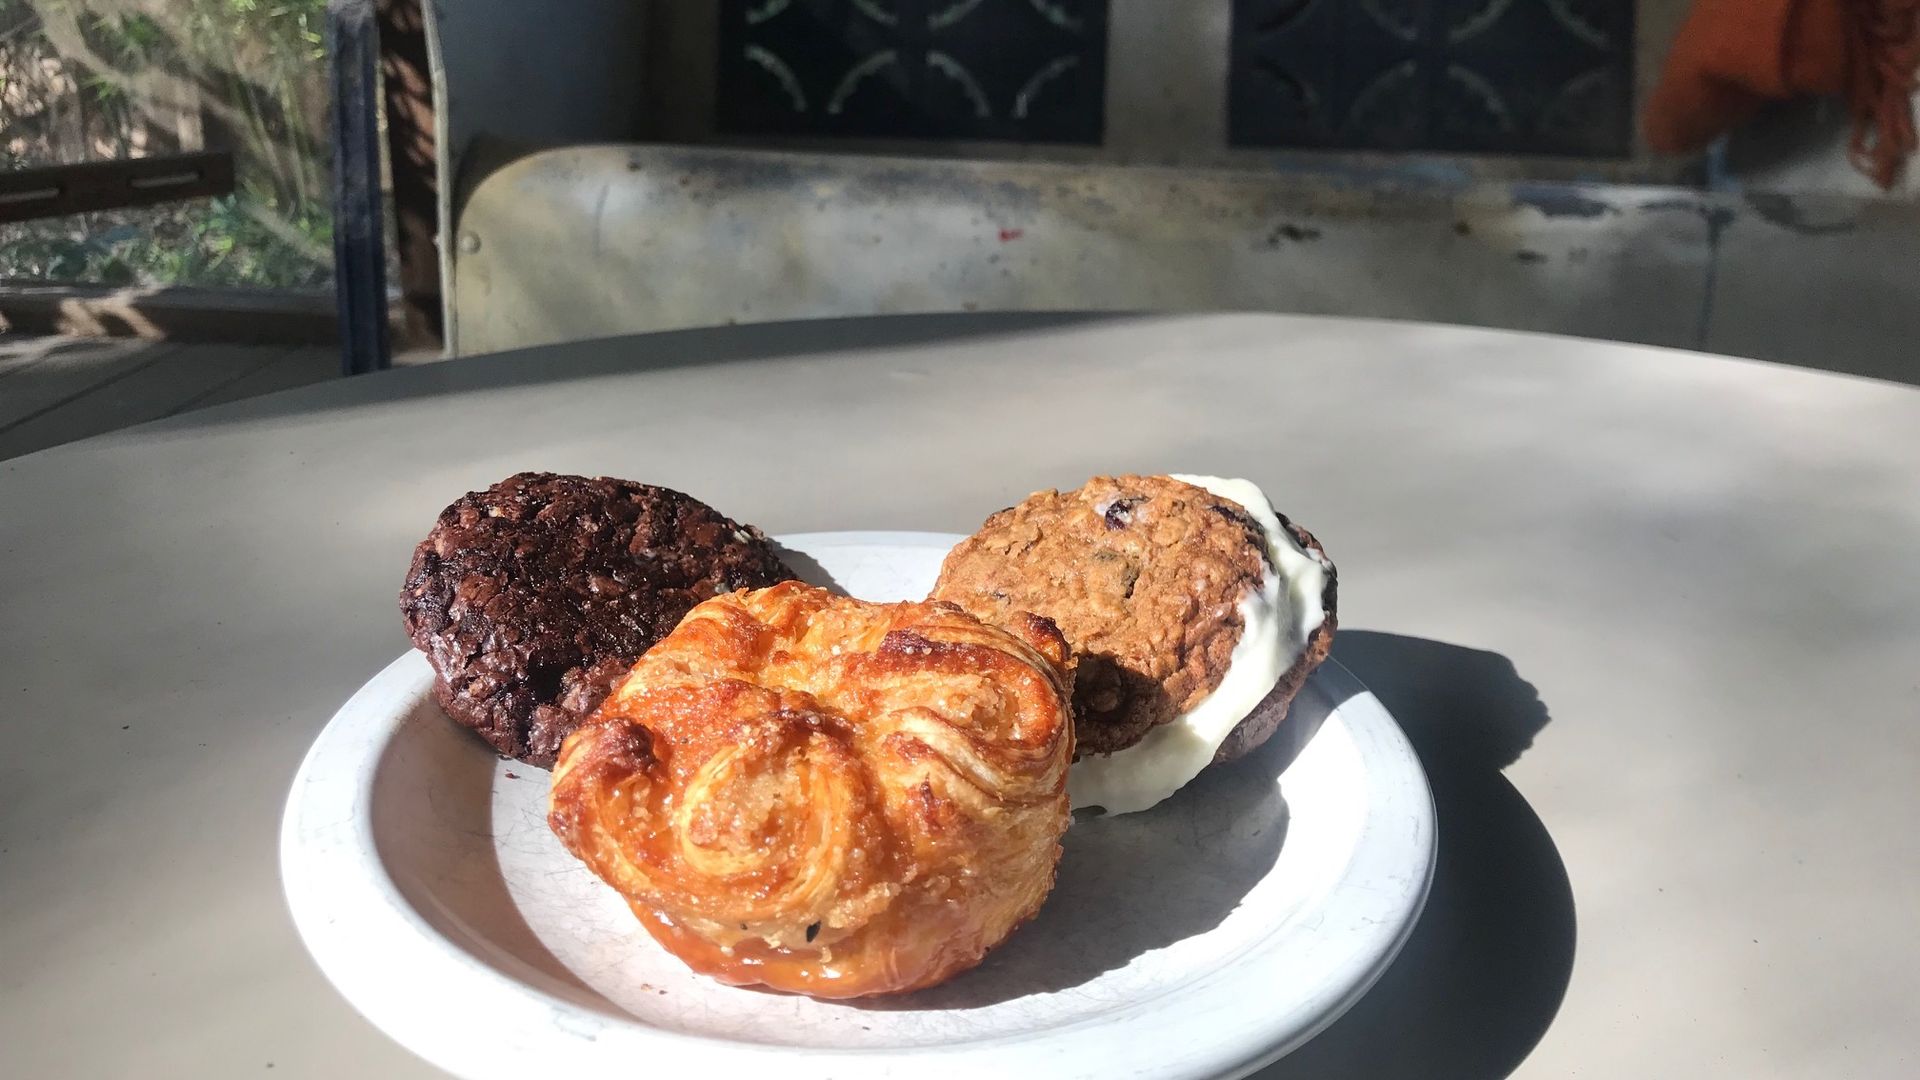 A trio of pastries from Mañana.